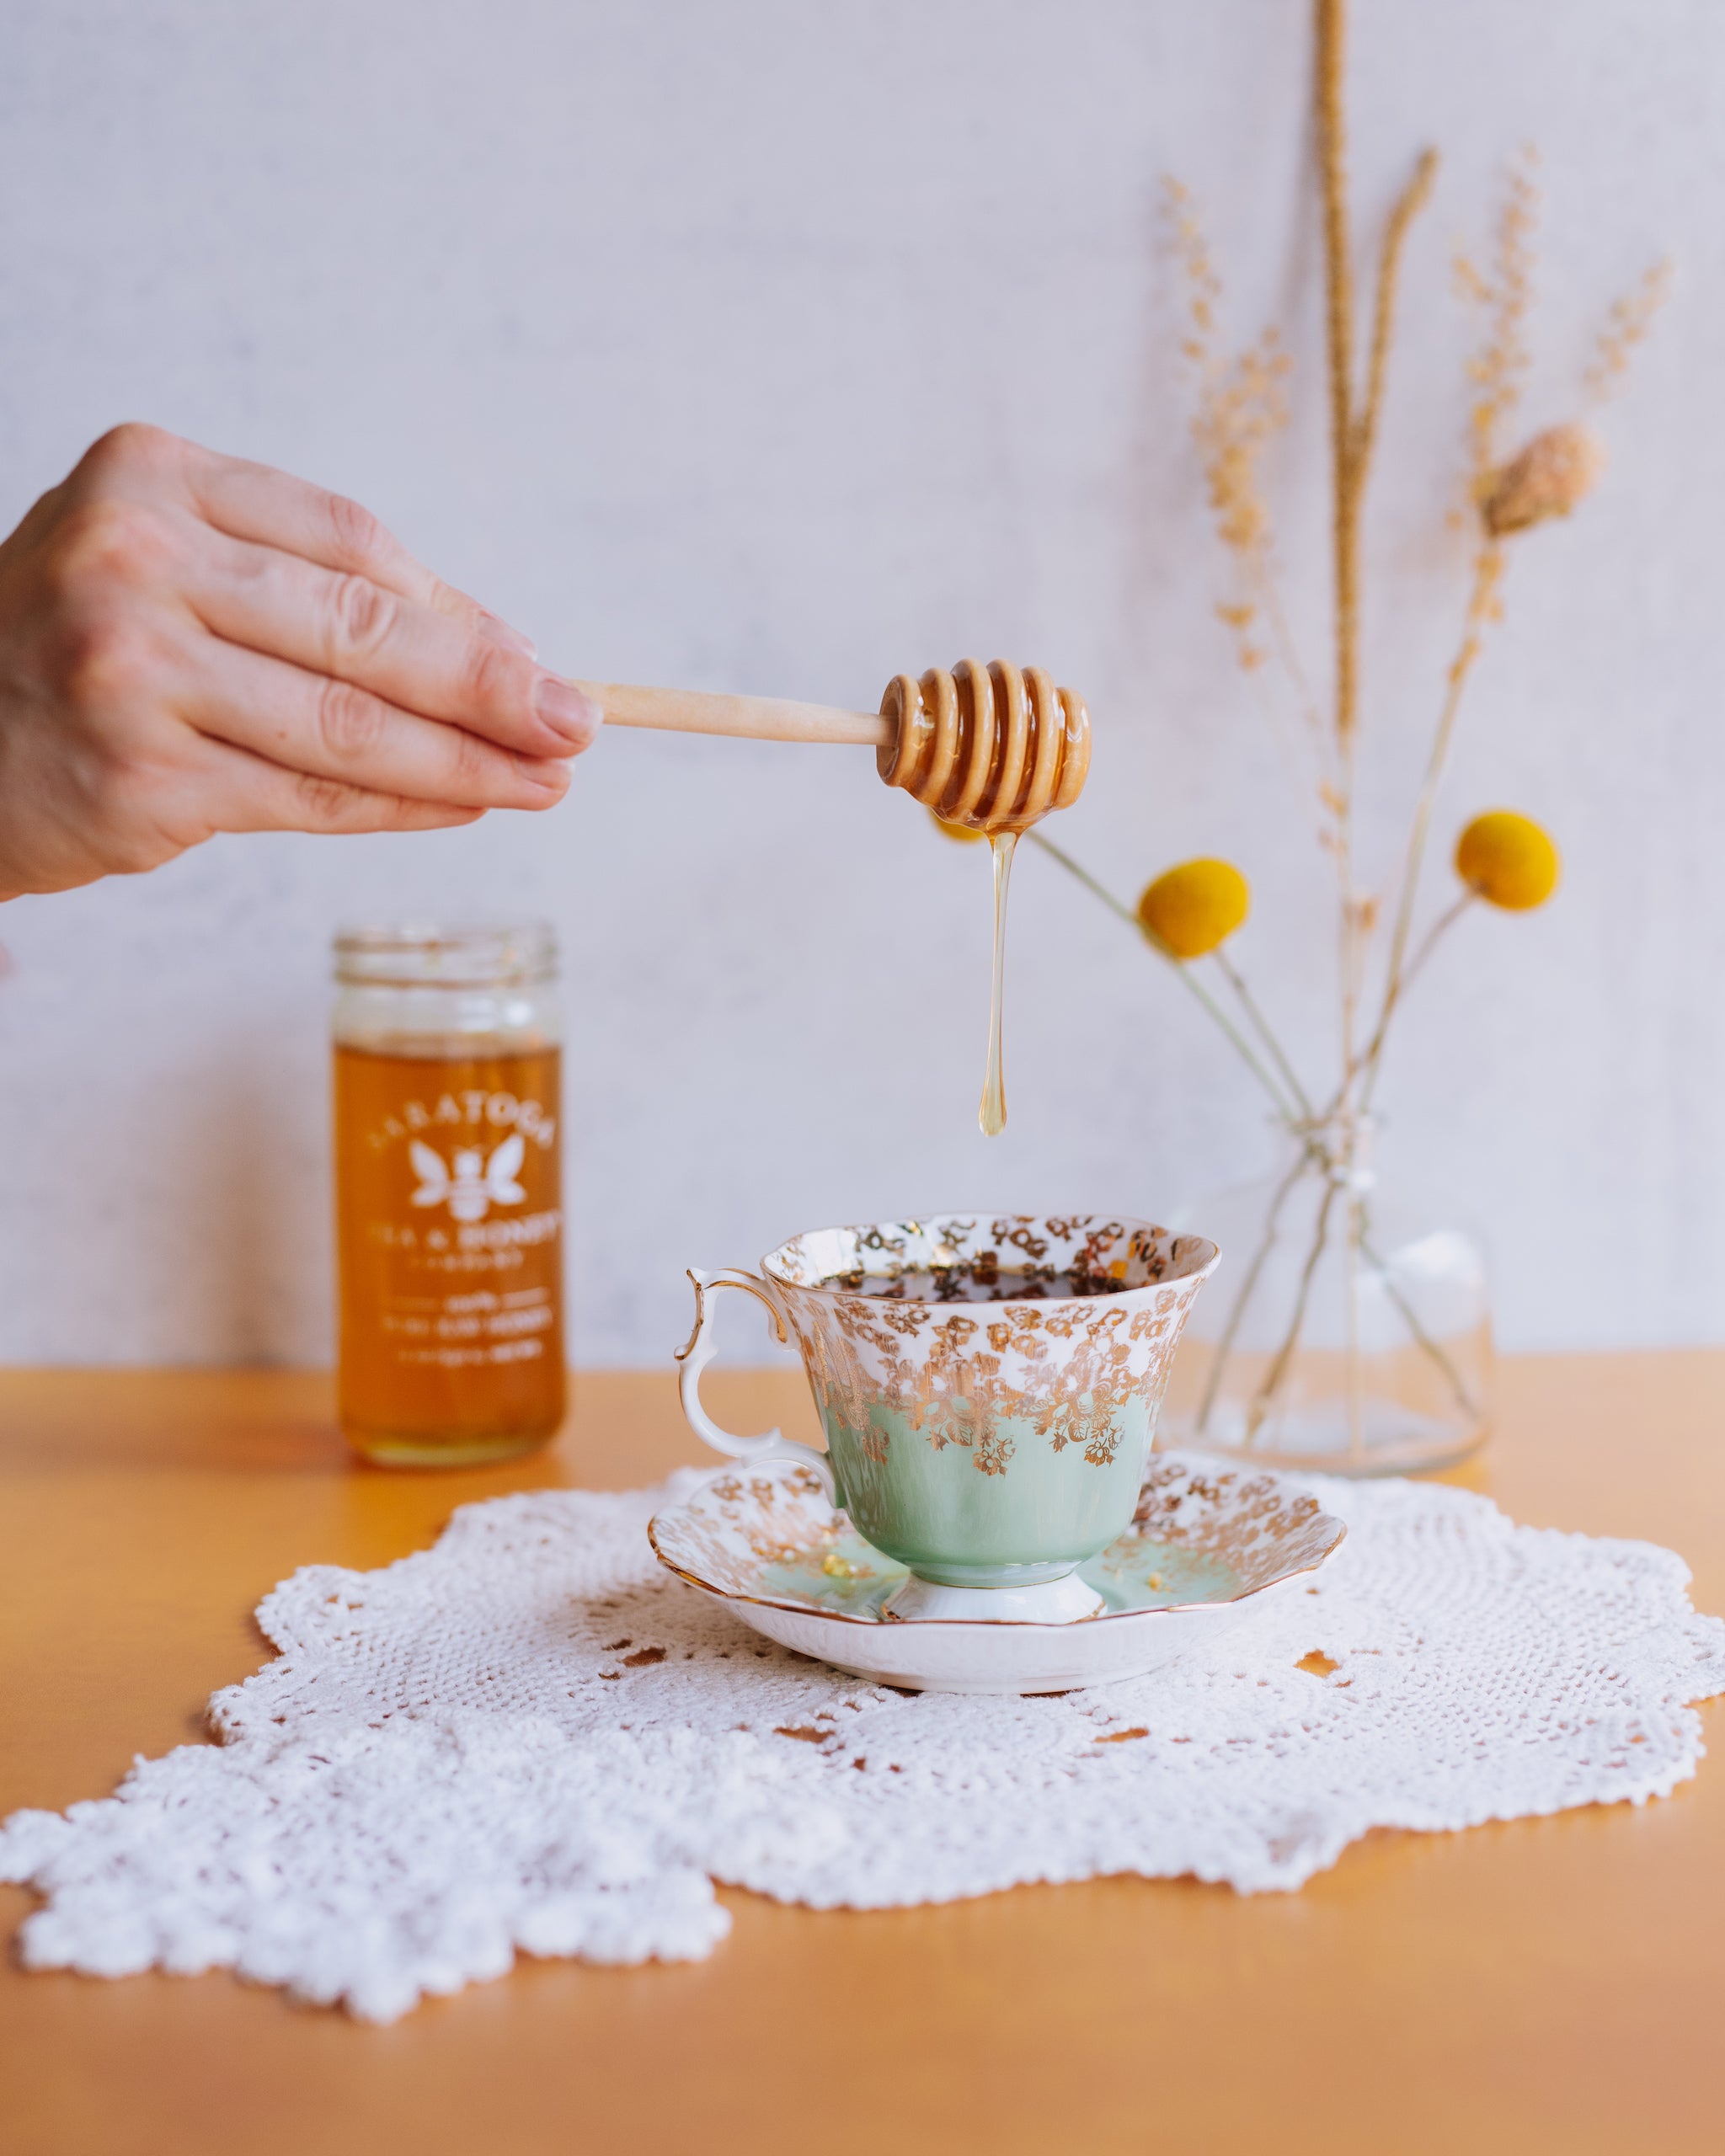 hand drizzling honey into vintage teacup using a wooden honey dipper